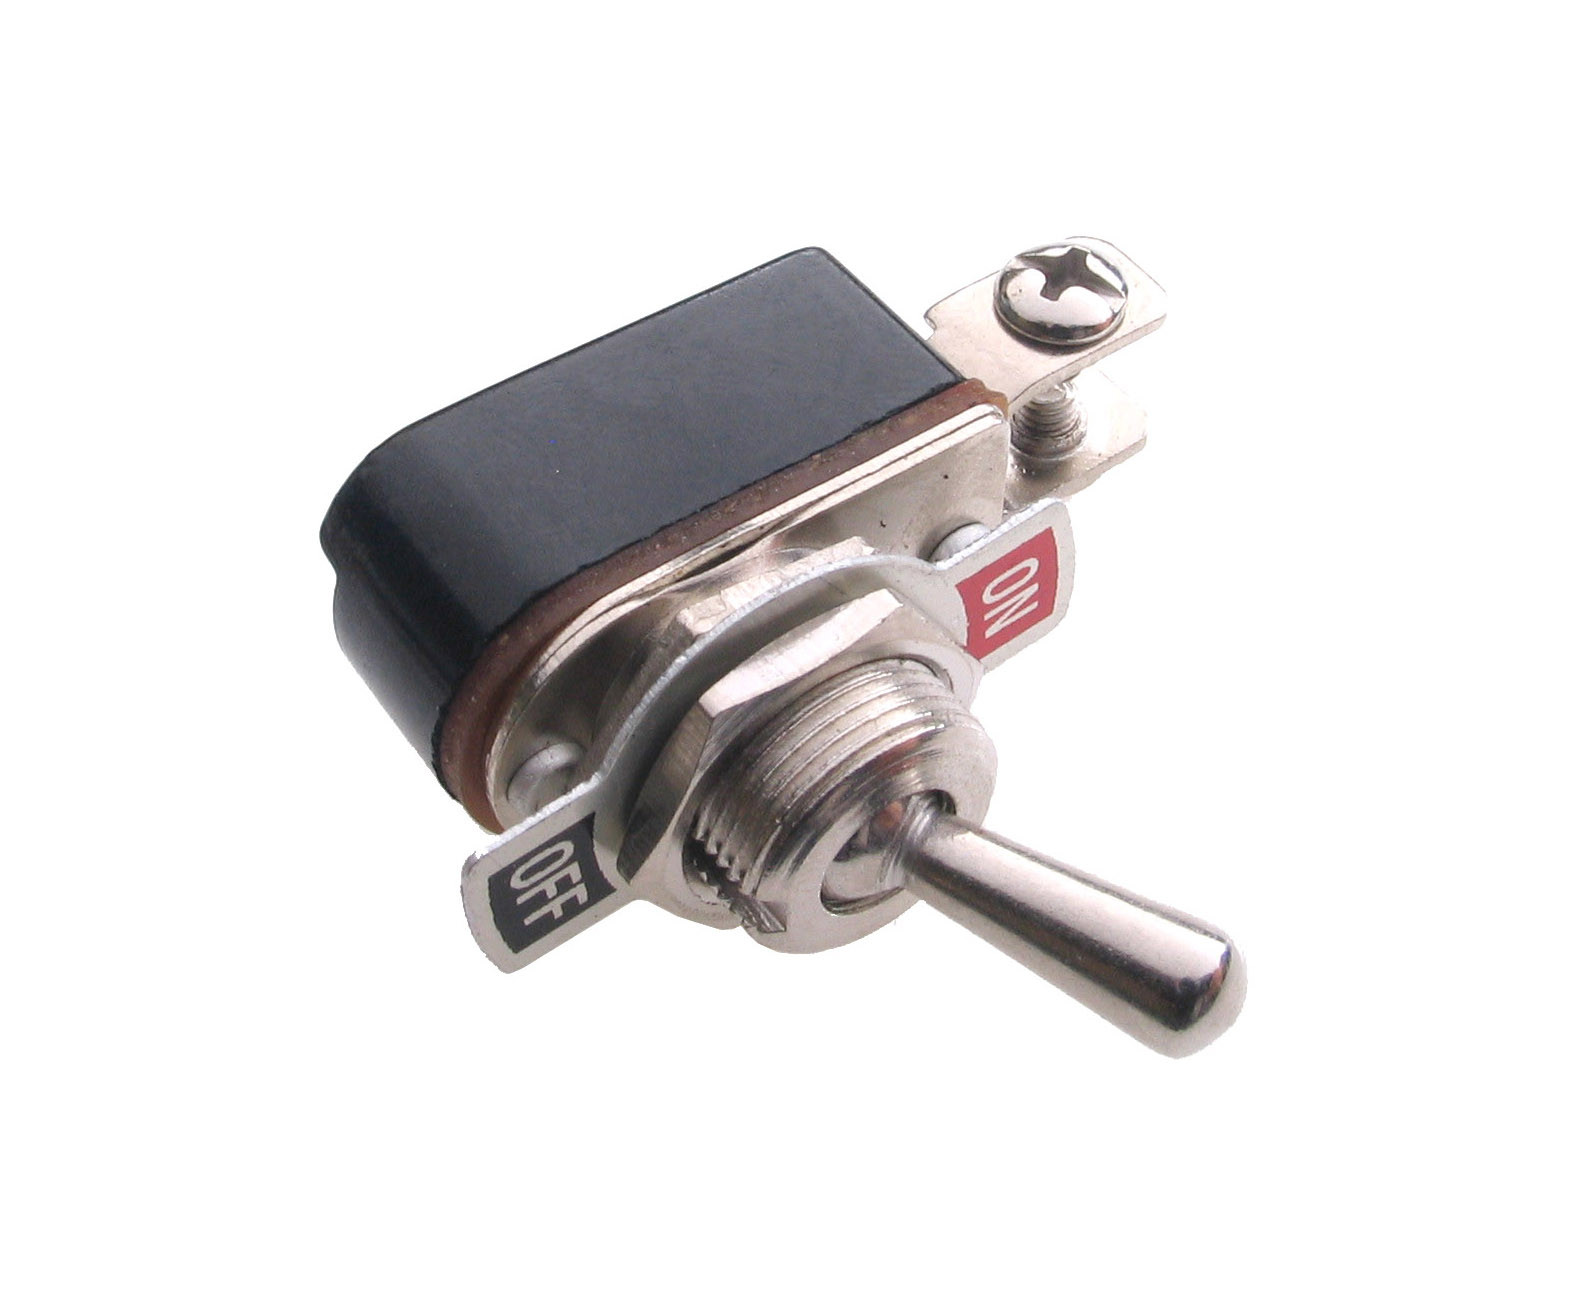 KNH-1S; toggle switch;